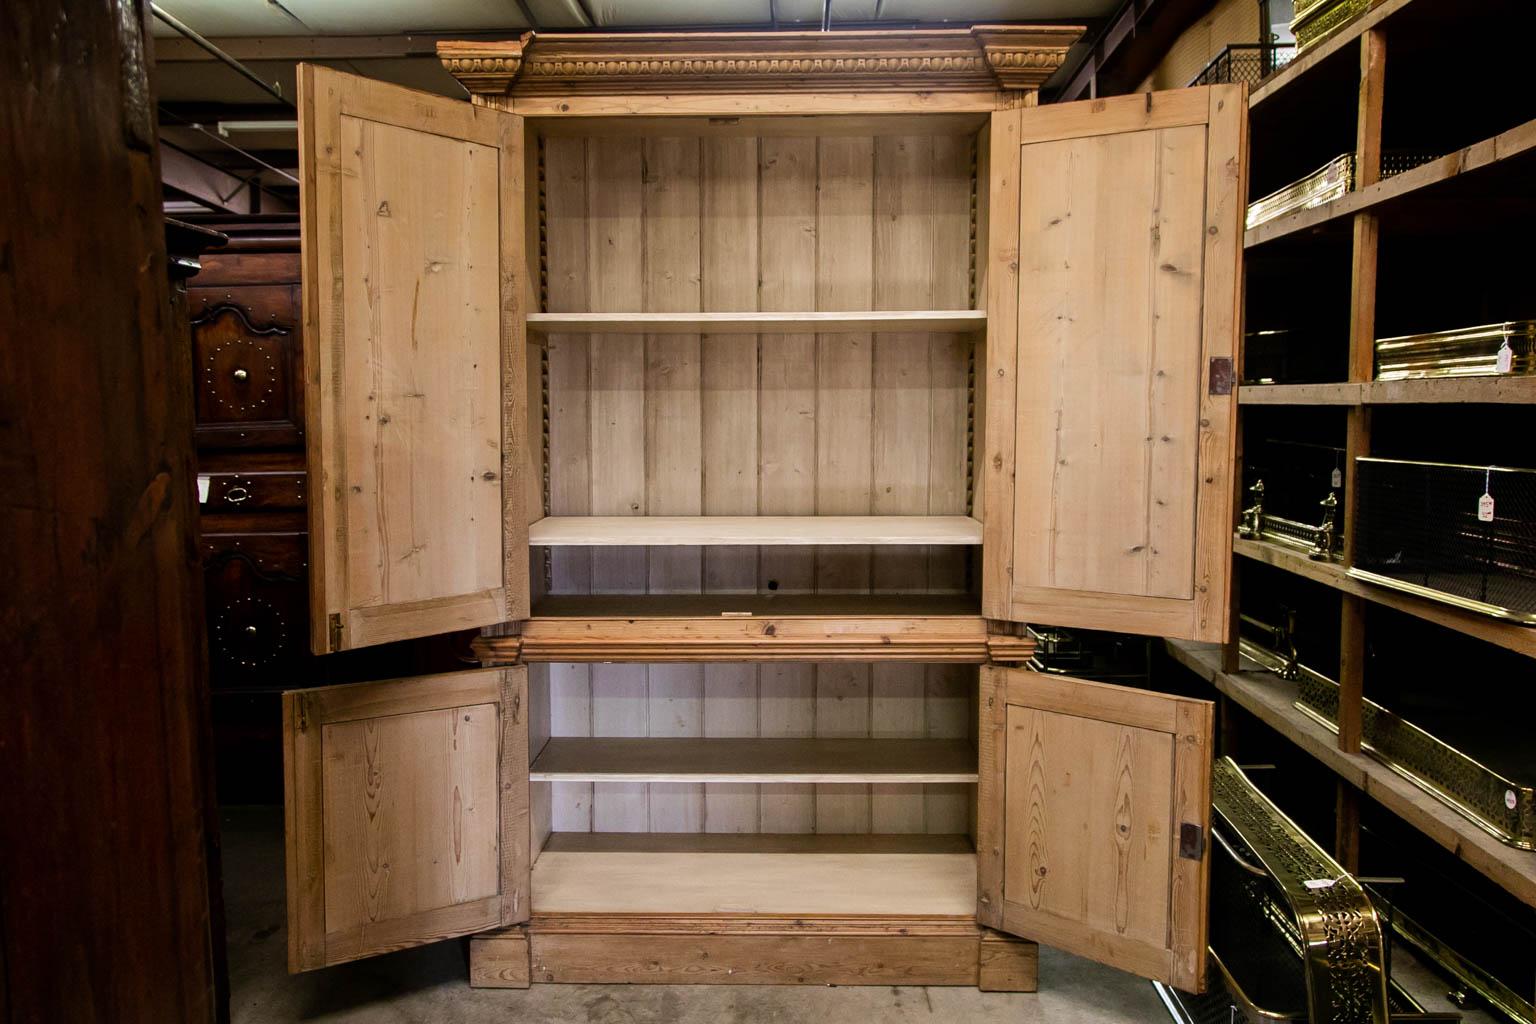 This cupboard is made from antique reclaimed pine. It has carved moldings on the cornice and stiles. There are two recessed molded panels on the top and bottom sides. The interior in the top has two adjustable shelves. The lower section has one